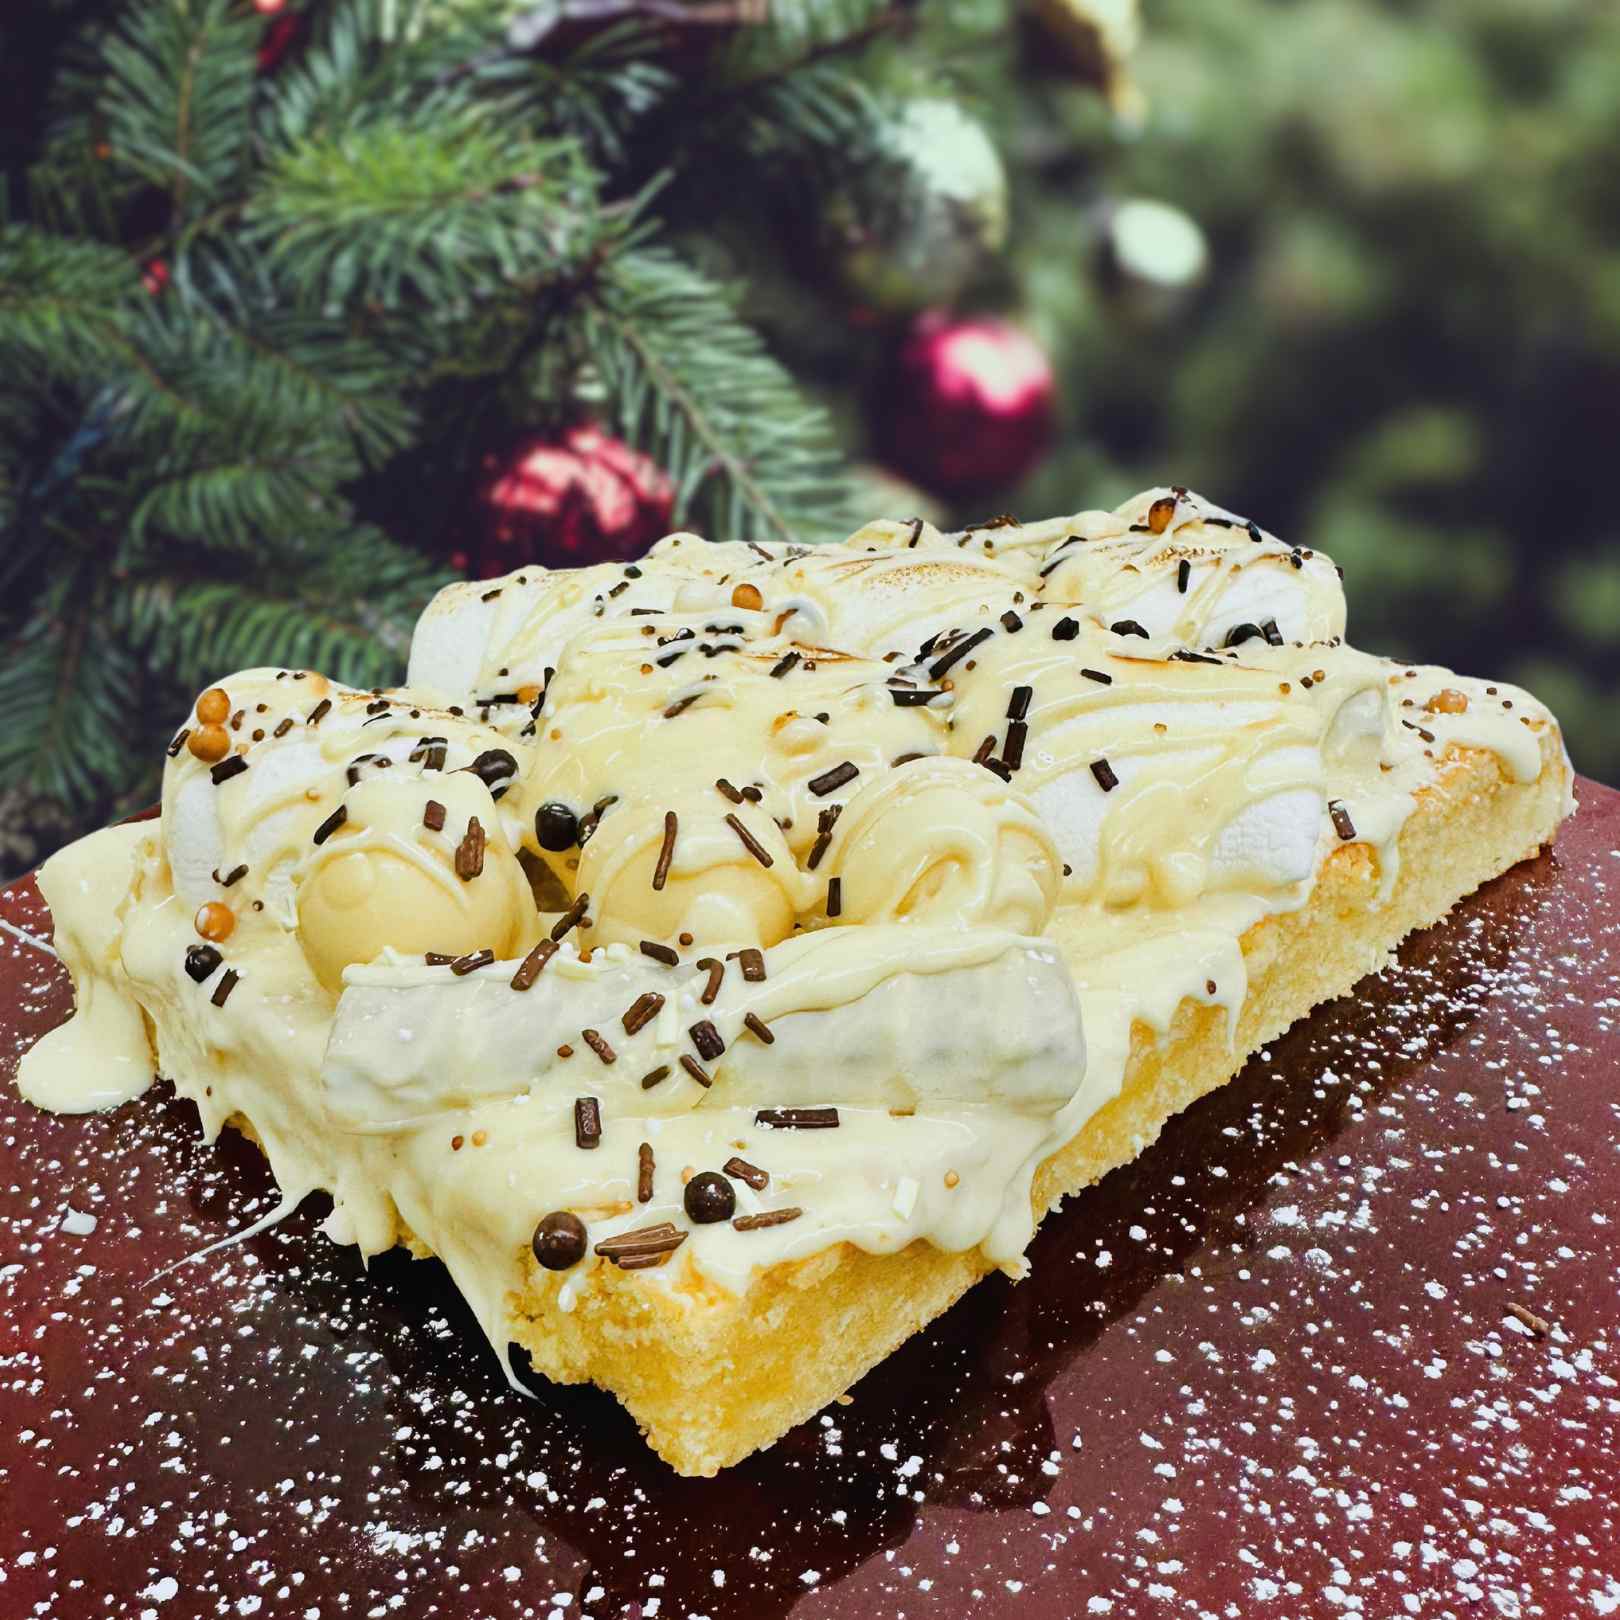 Gift Ideas - The Slab Of The Month -Snowy Vanilla Dream - Subscription